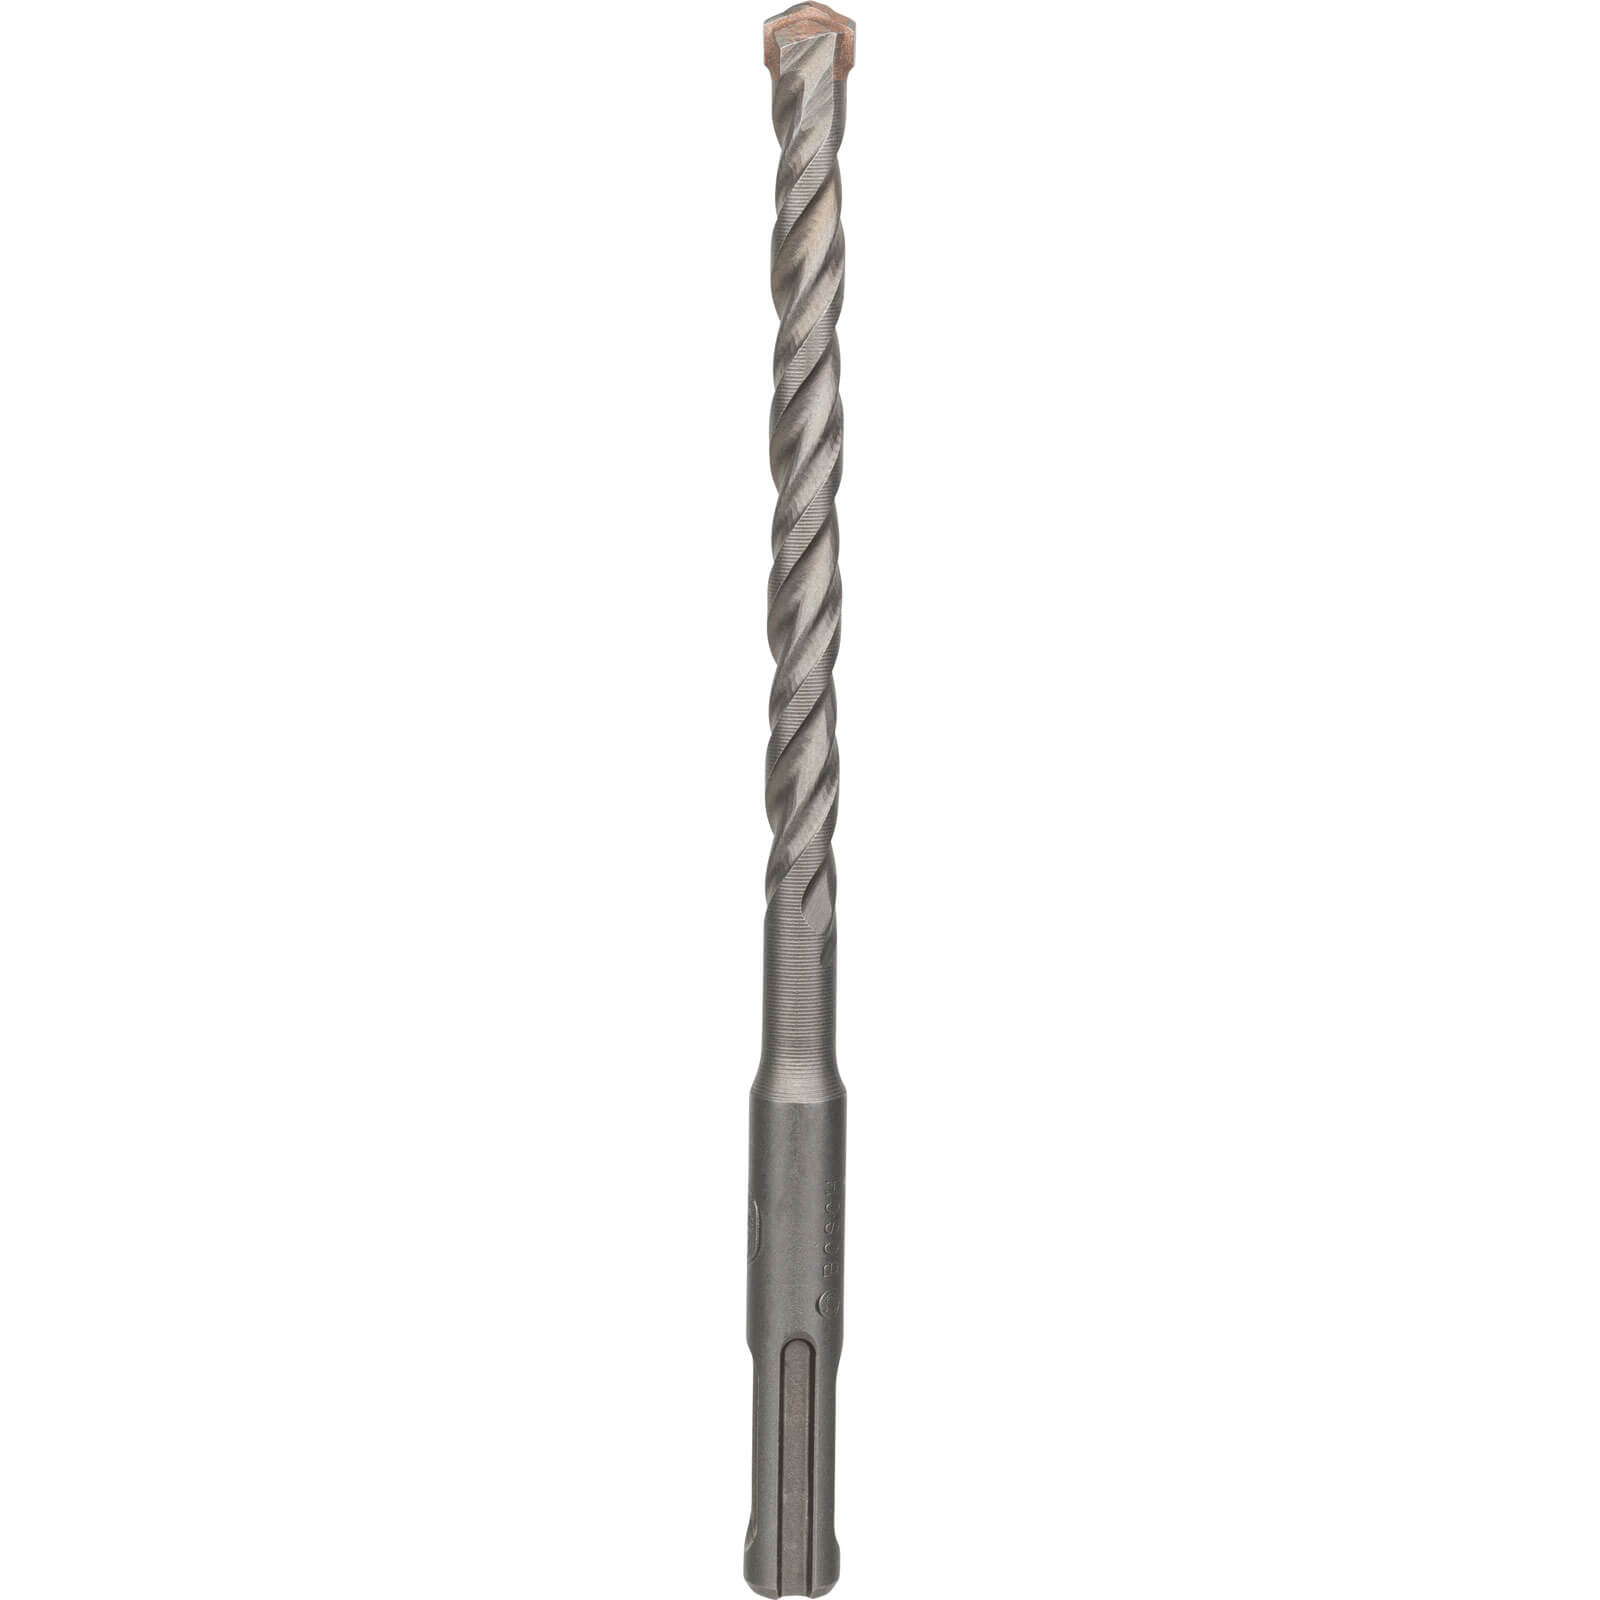 Image of Bosch Series 3 SDS Plus Masonry Drill Bit 9mm 160mm Pack of 1